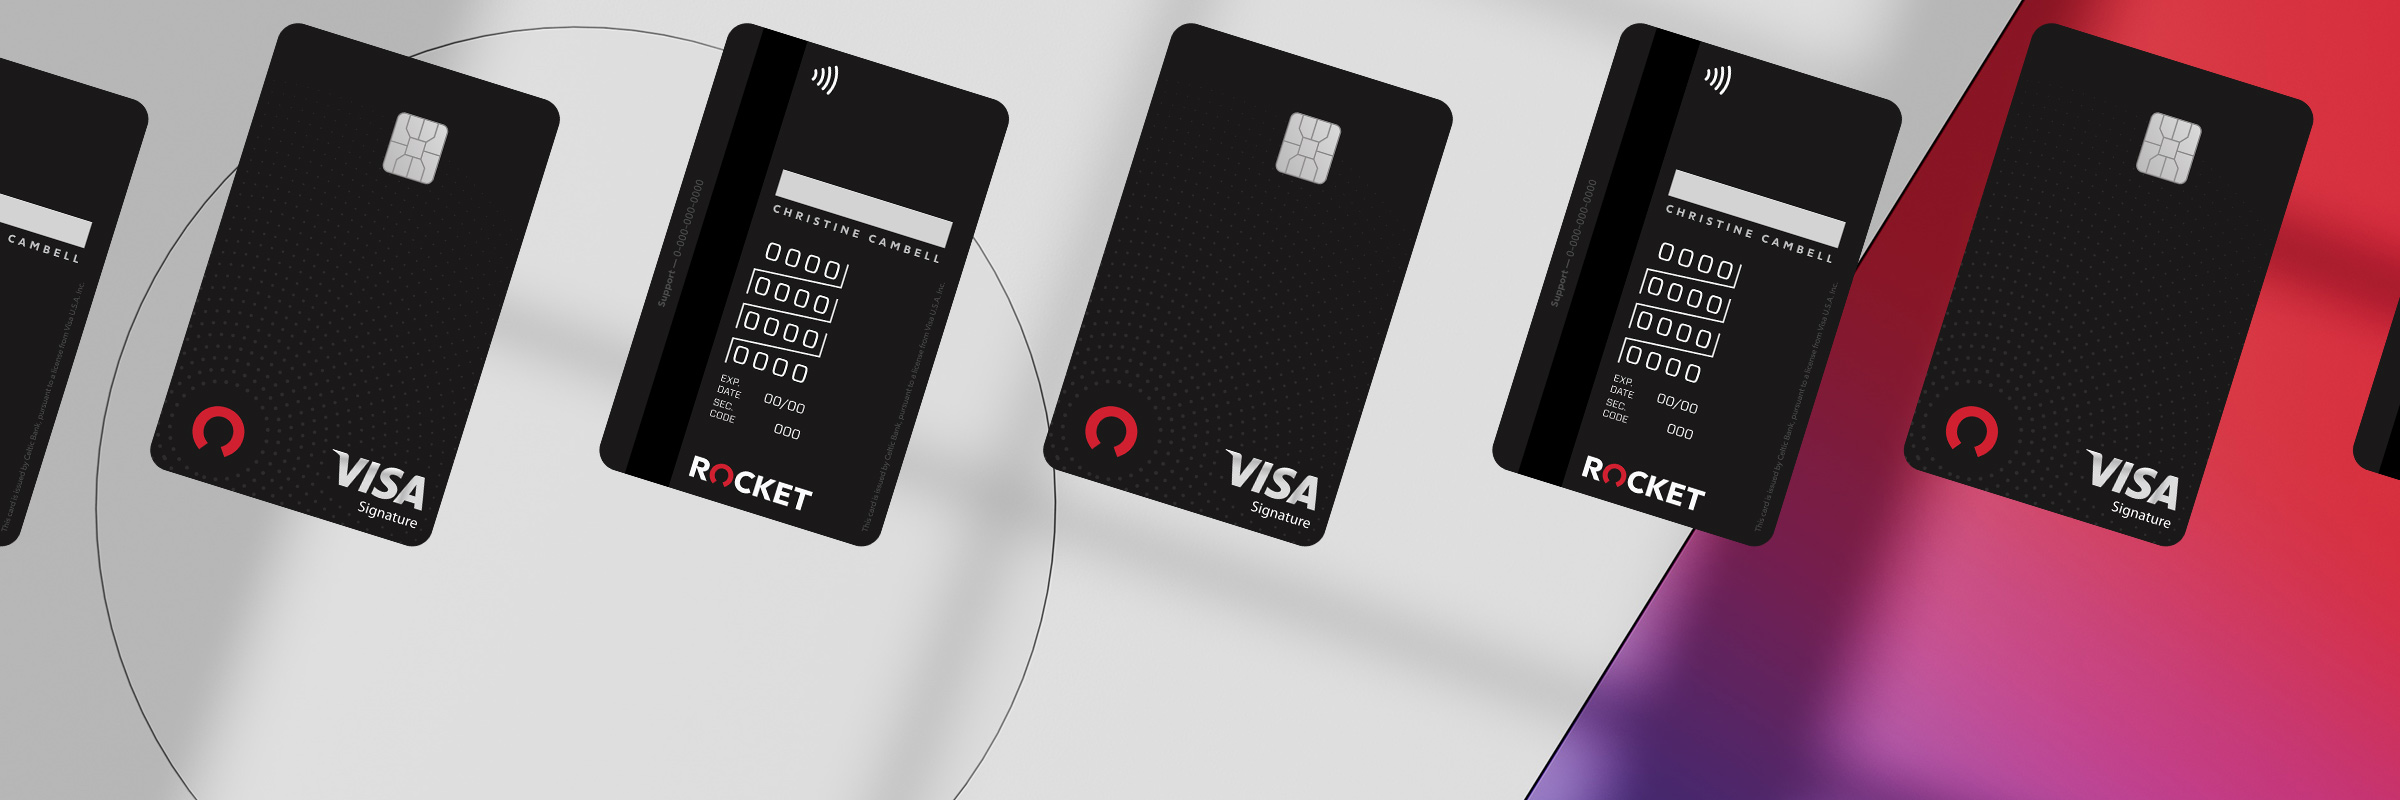 Swipe or Tap Your Way To A Home: New Rocket Visa Signature Card Is The First Credit Card Designed with Homeownership in Mind